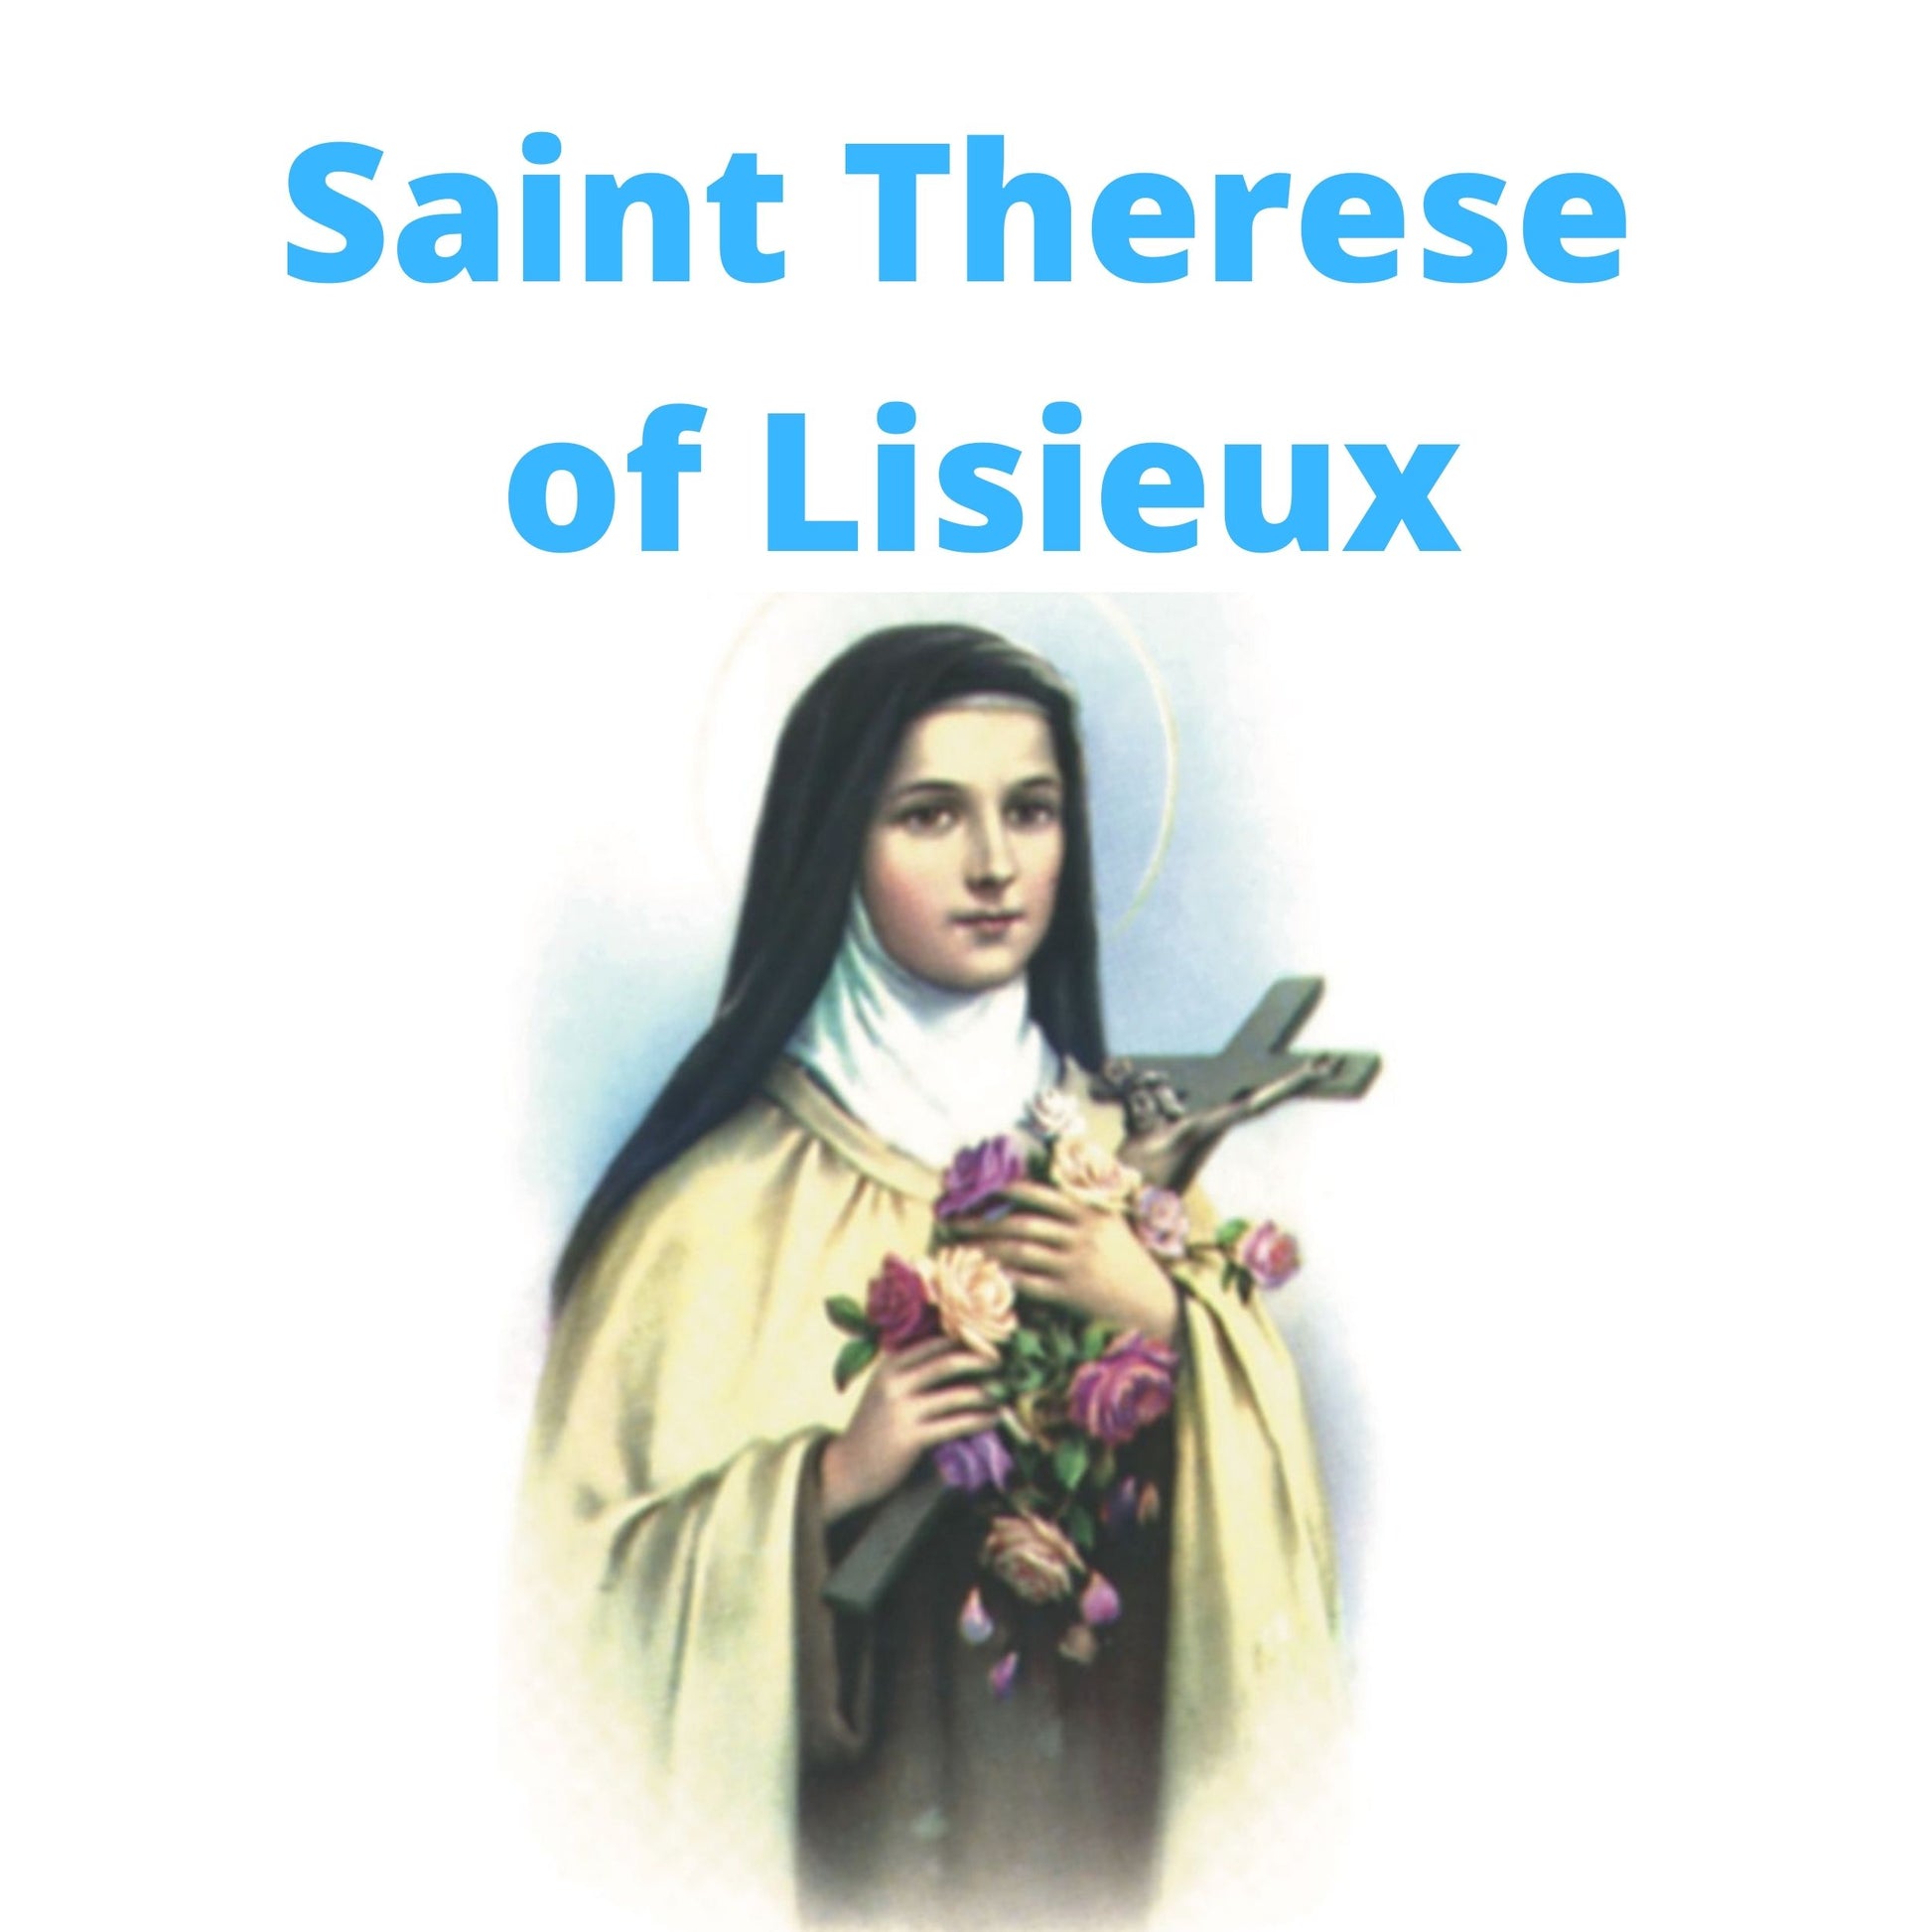 Saint Therese of Lisieux Video Download MP4 - Bob and Penny Lord